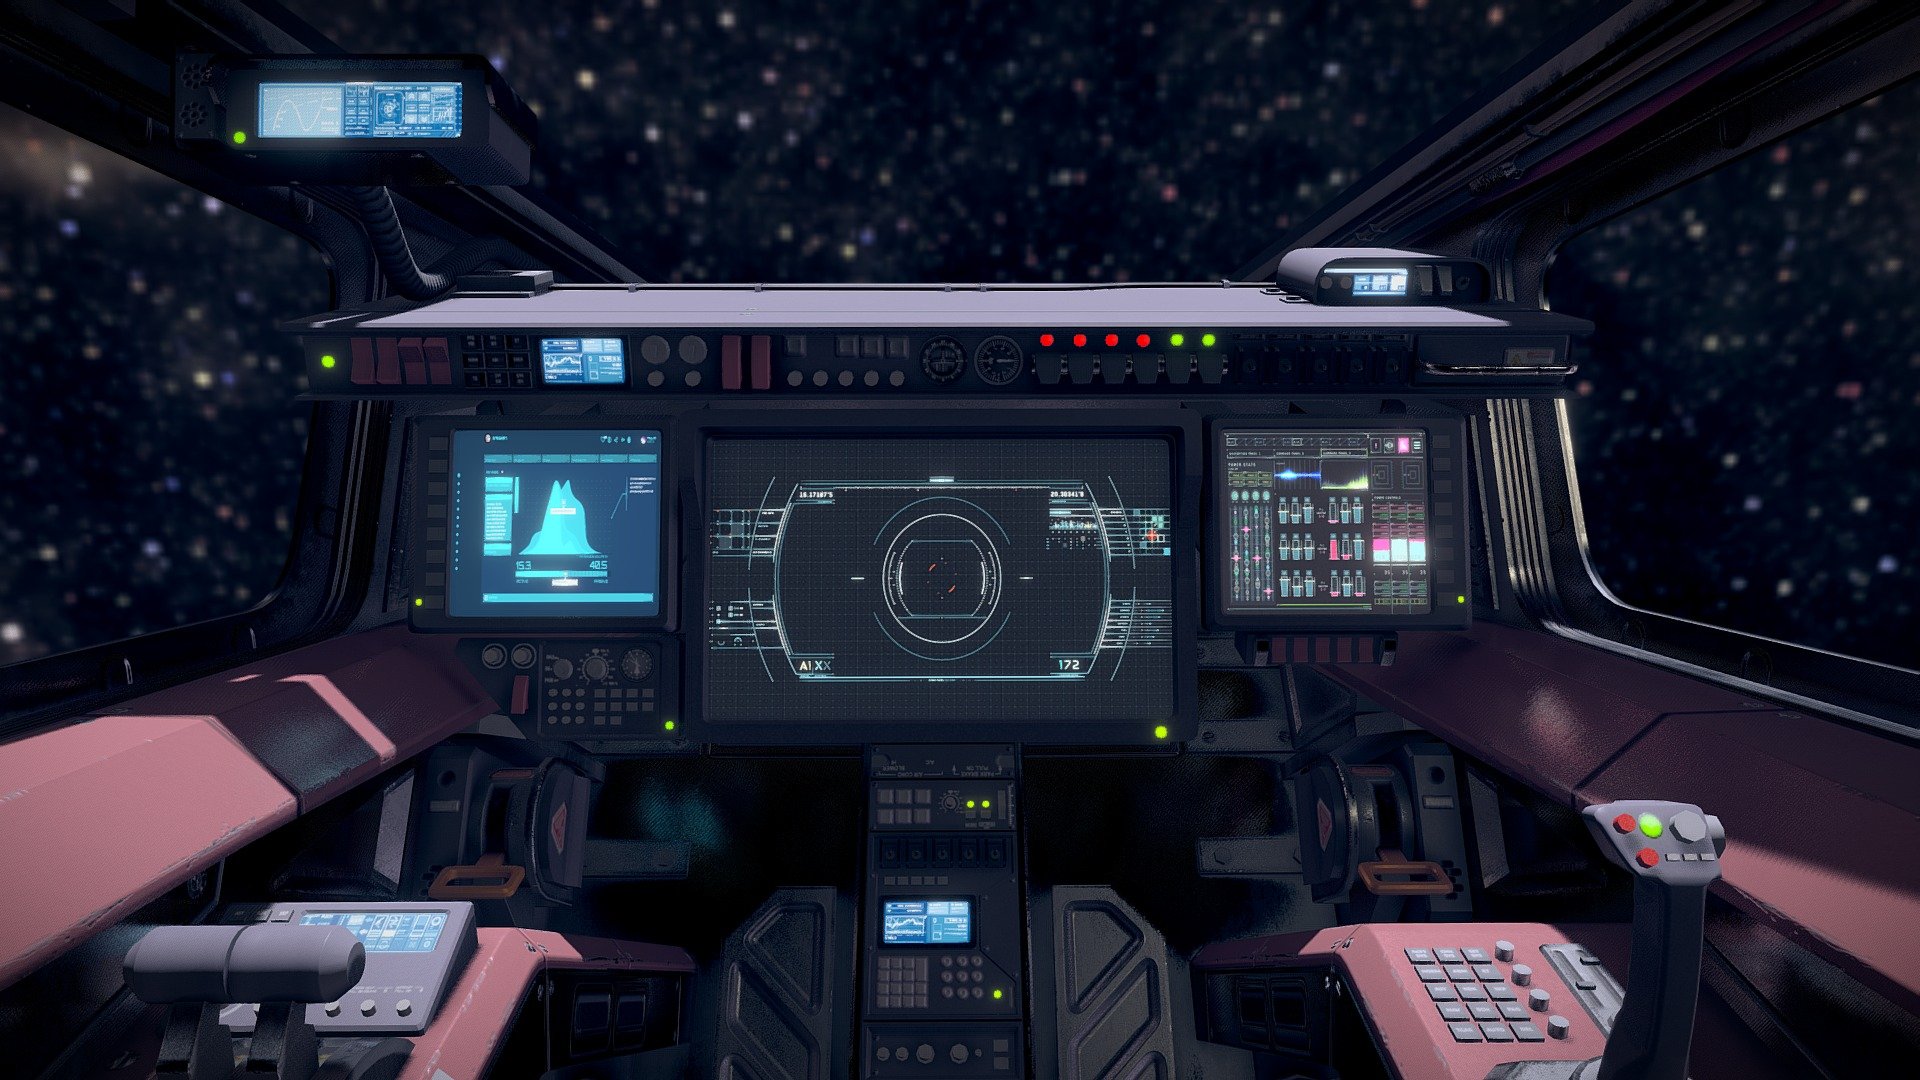 AAA Quality, highly detailed sci-fi cockpit, perfect for any space-sim or VR experience. With 4K resolution PBR Textures.

This Package contains:
1 FBX Containing 4 meshes: Body, Glass, Joystick and Throttle Control, both pivoted correctly for easy animating.

****Textures:
All textures provided in .psd or .png format.
This asset contains 2 main materials: Body and Glass
- The body texures come in 3 variants (Clean, Weathered, Rusty).
Each variant has it's own Albedo, Metallic, Roughness and Normal Textures.
AmbientOcclusion and Emission are shared between all variants.
For each variant, a PSD file is provided for the Albedo texture (Customize metal and leather color)
The Emissive texture is also a PSD (Customize screen colors)




The glass textures come in 4 variants (Clean, Dirty, Scratched, Dirty&amp;Scratched)
The AmbientOcclusion texture is shared between all variants.
 - Sci Fi Fighter Cockpit 5 - 3D model by VattalusAssets 3d model